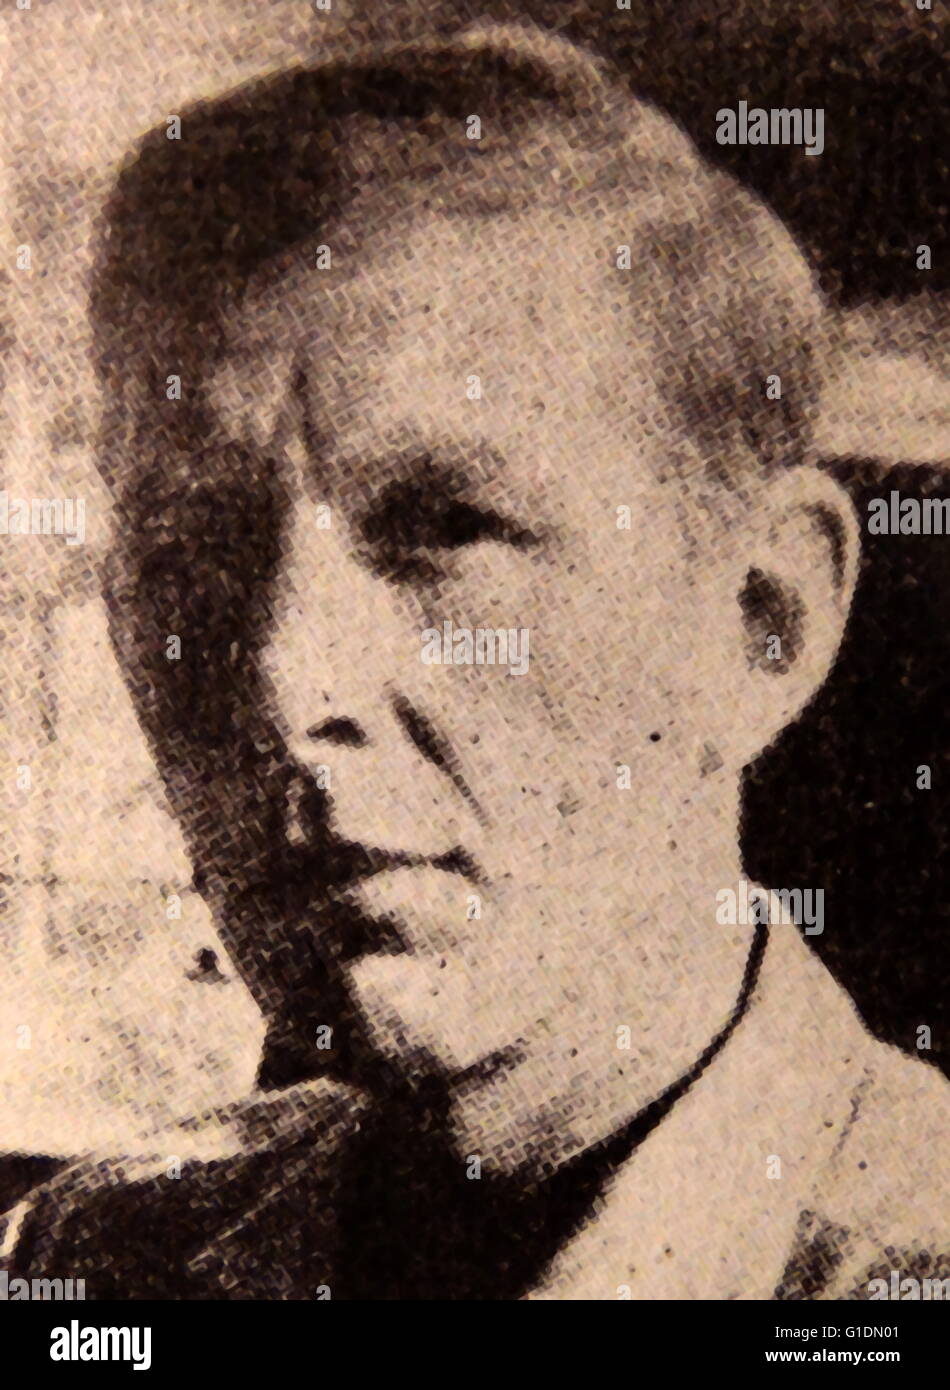 Photographic portrait of W. H. Auden (1907-1973) an Anglo-American poet. Dated 20th Century Stock Photo